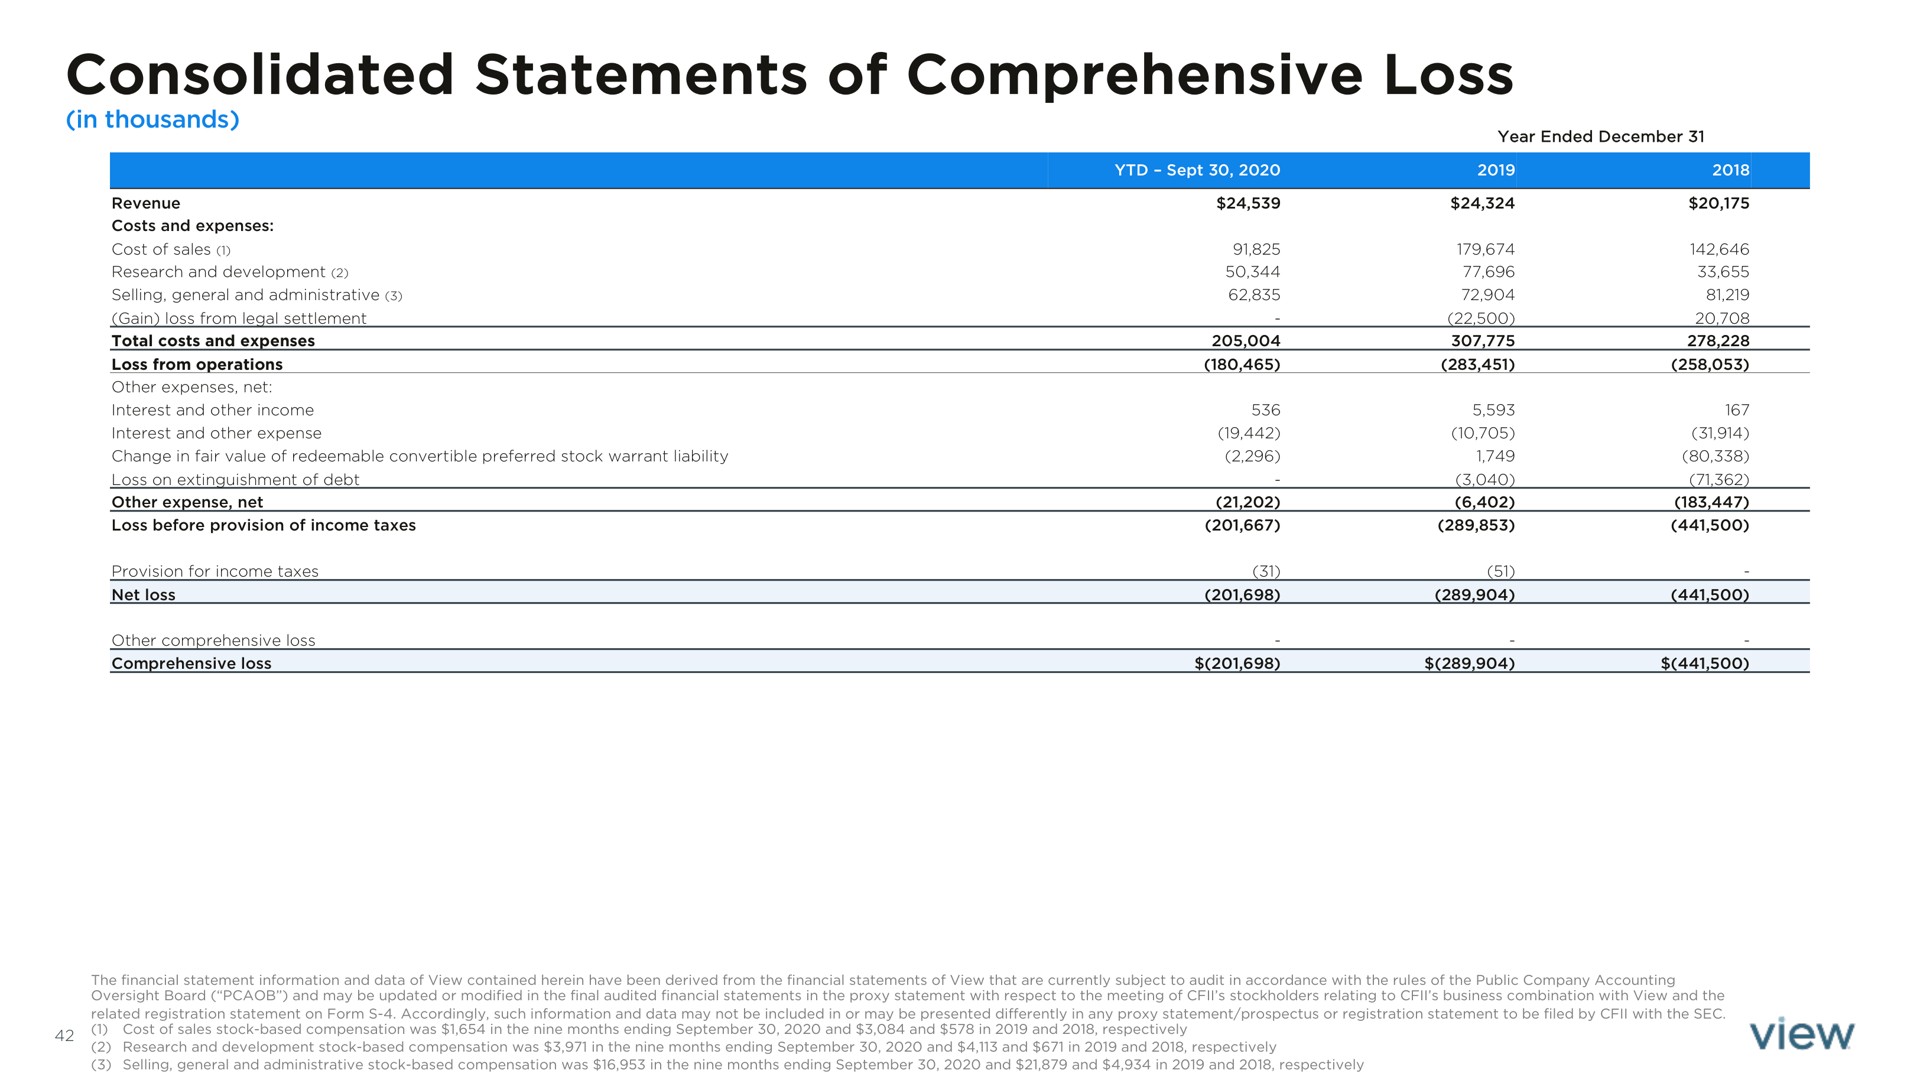 consolidated statements of comprehensive loss | View